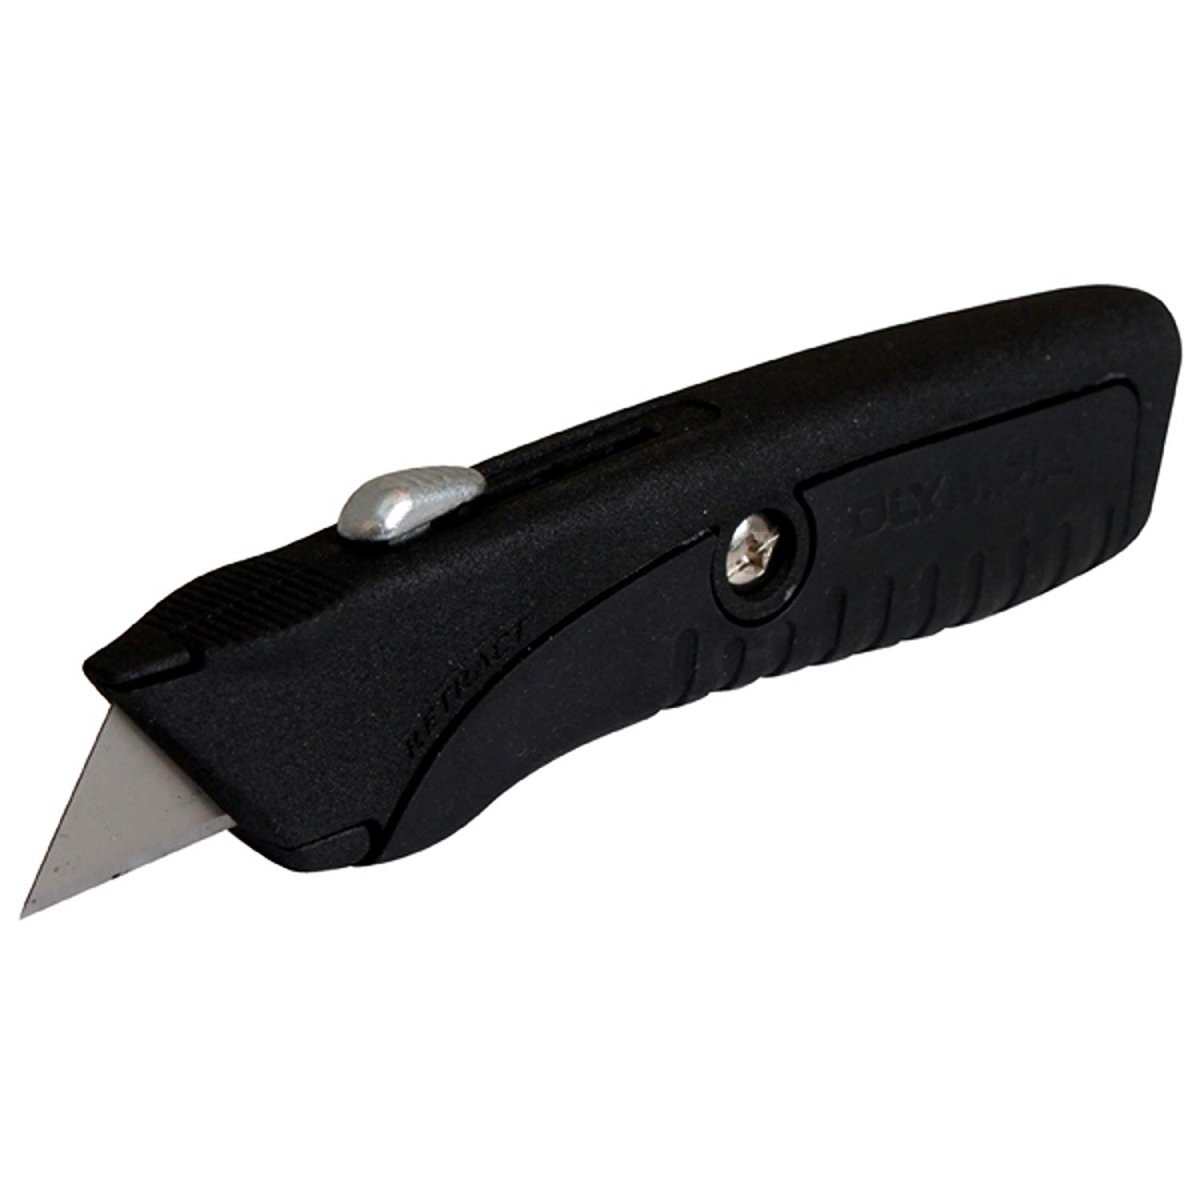 33-056 5.75 In. Retractable Utility Knife, Black